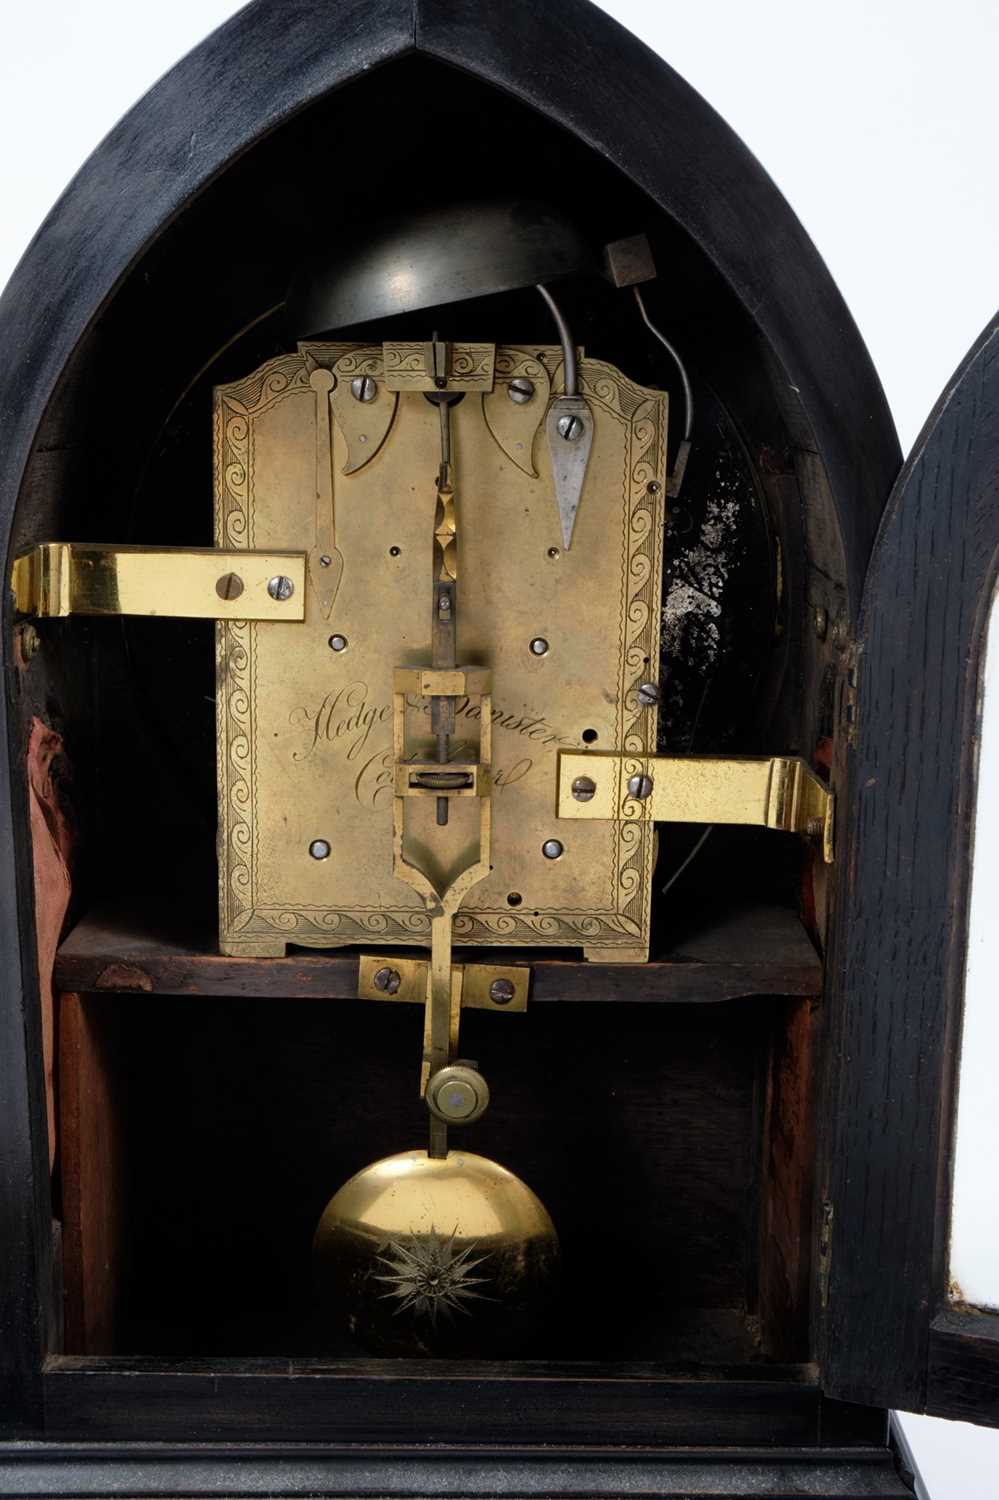 Hedge and Banister of Colchester, a rare George III ebony lancet shaped bracket clock - Image 3 of 5